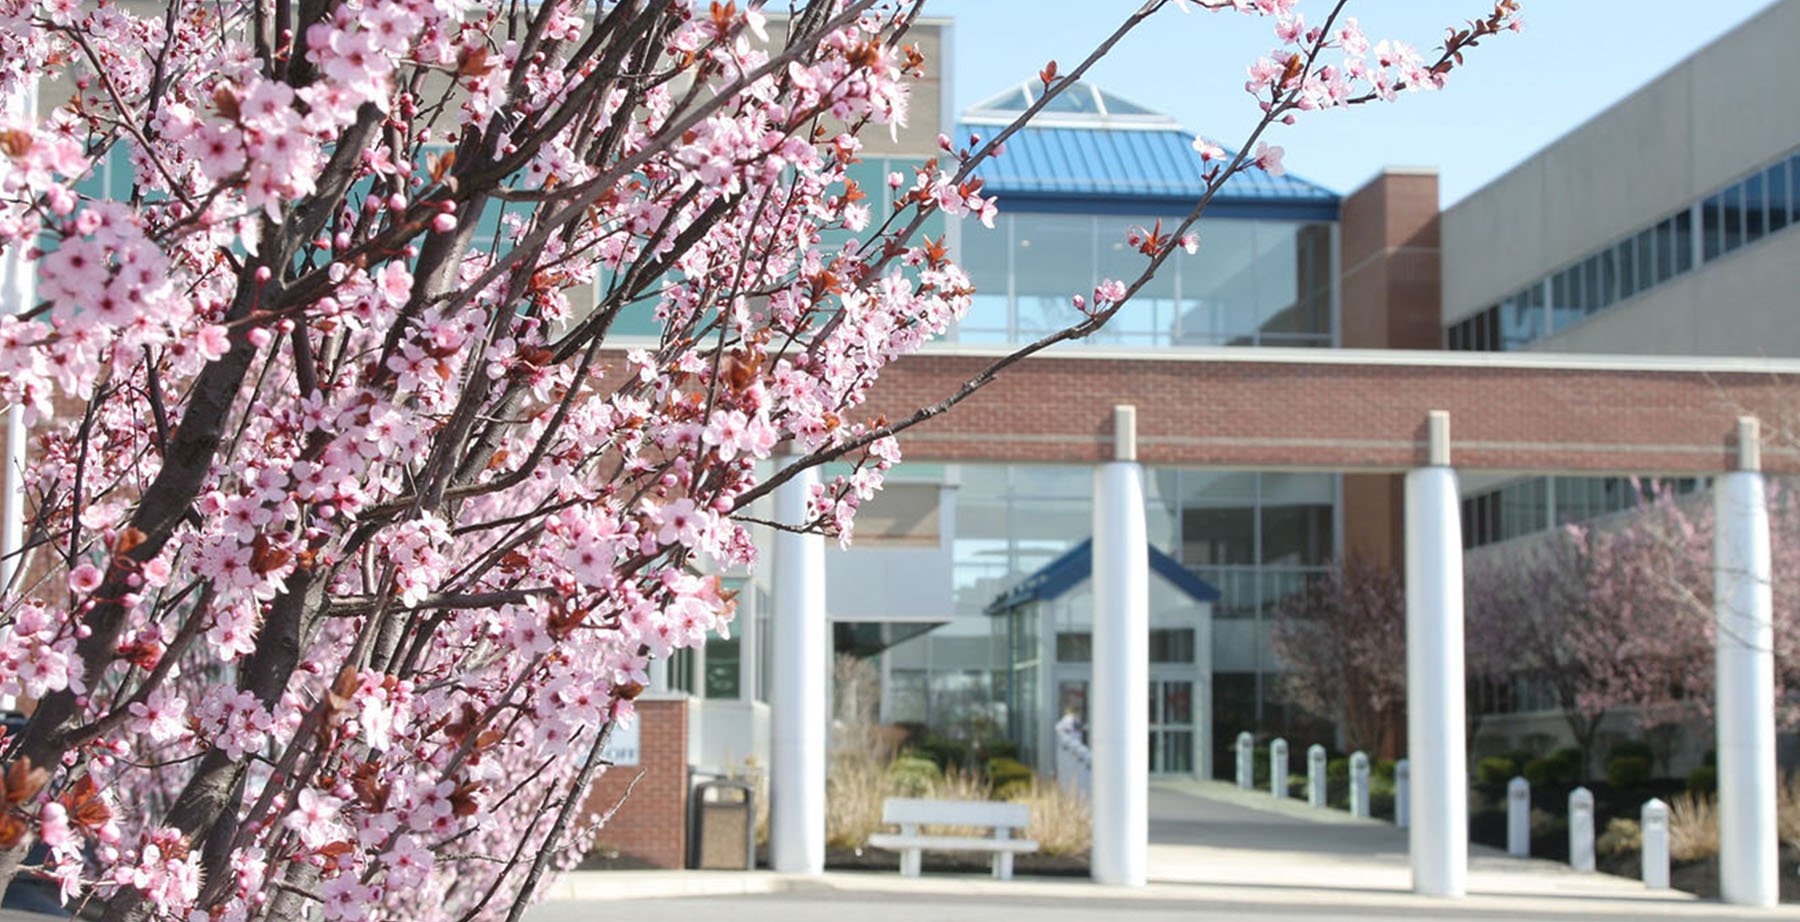 a cherry blossom tree blooms outside of the Rowan Medicine building in Stratford